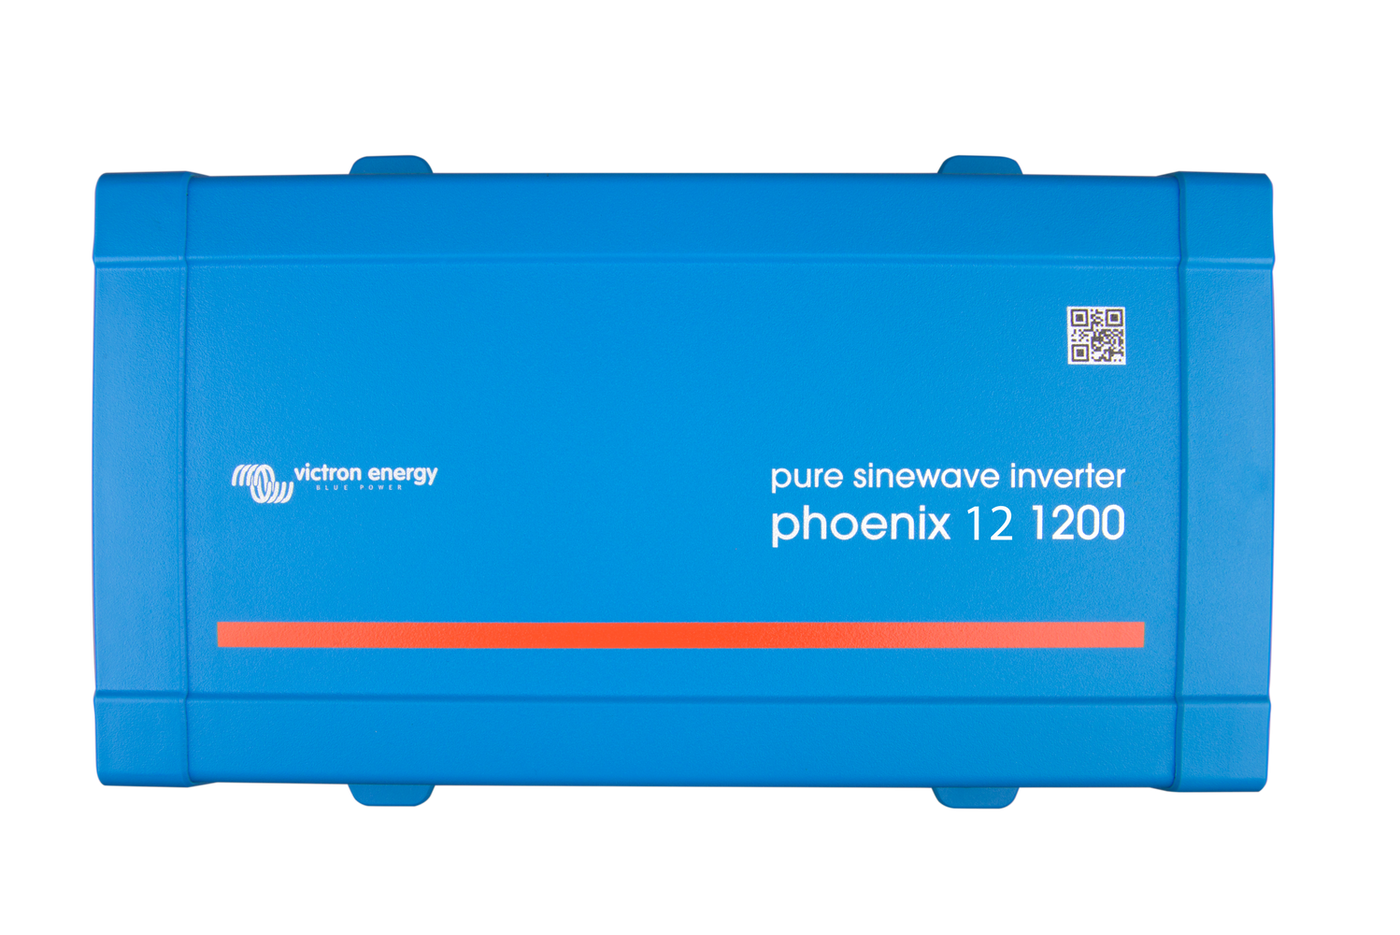 Phoenix 12/1200 120V Inverter with VE.Direct by Victron Energy